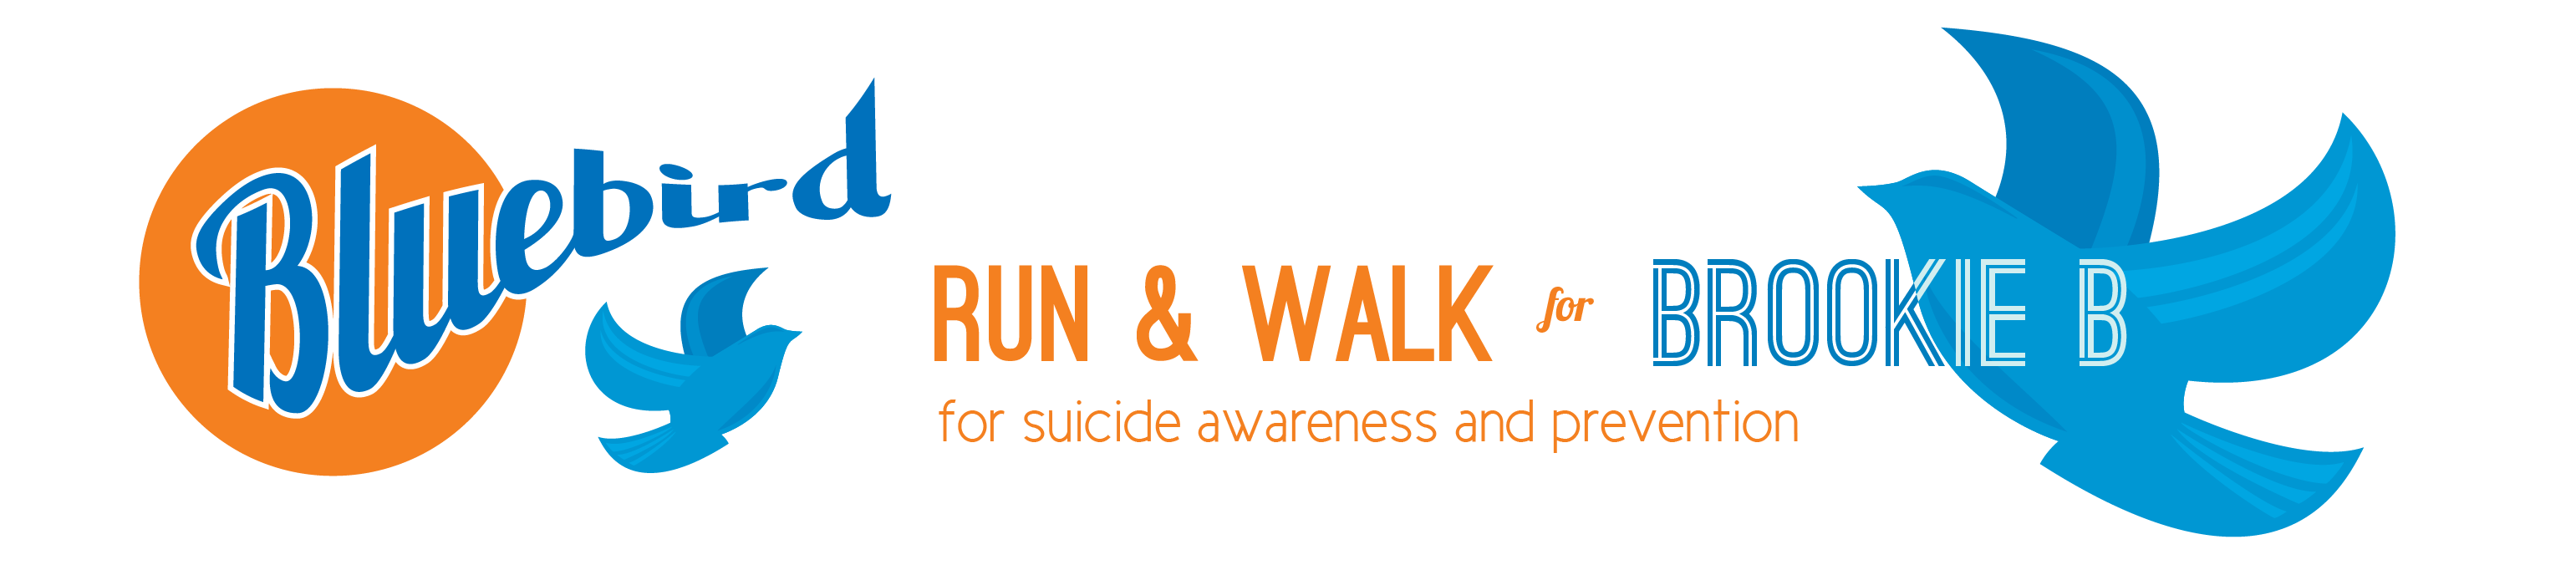 Running for Brookie B and #Suicide Postvention